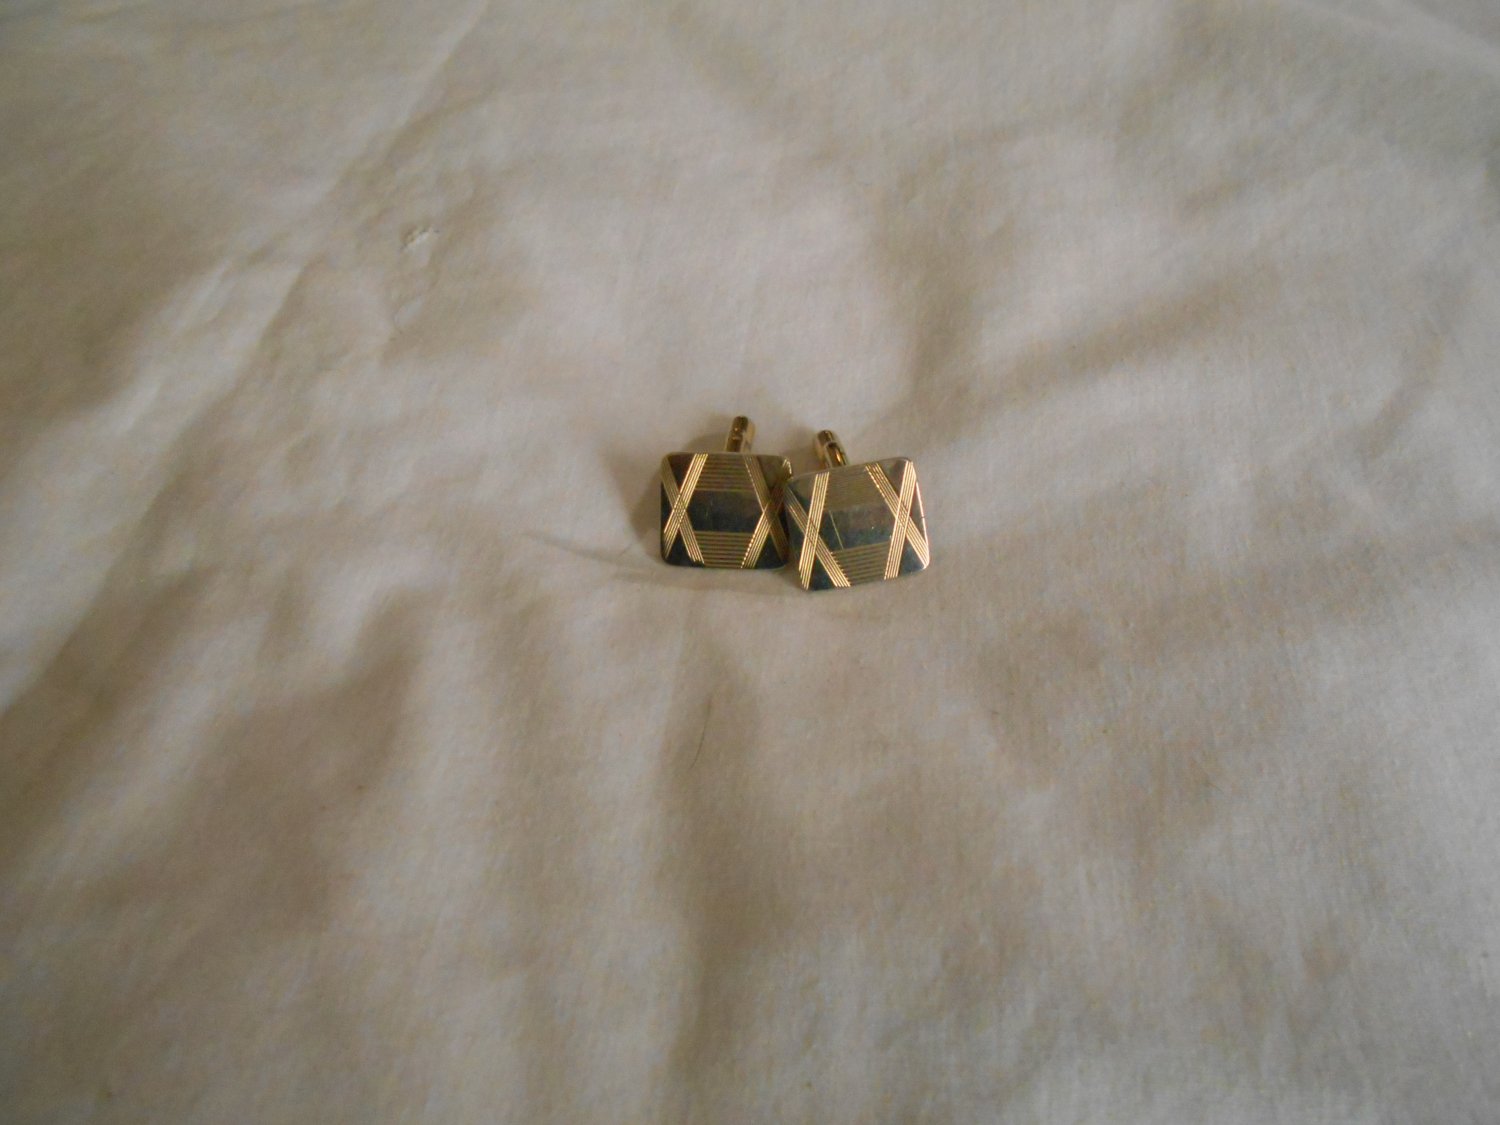 Vintage Gold Tone Cufflinks with a X Abstract Line Pattern on the Edge